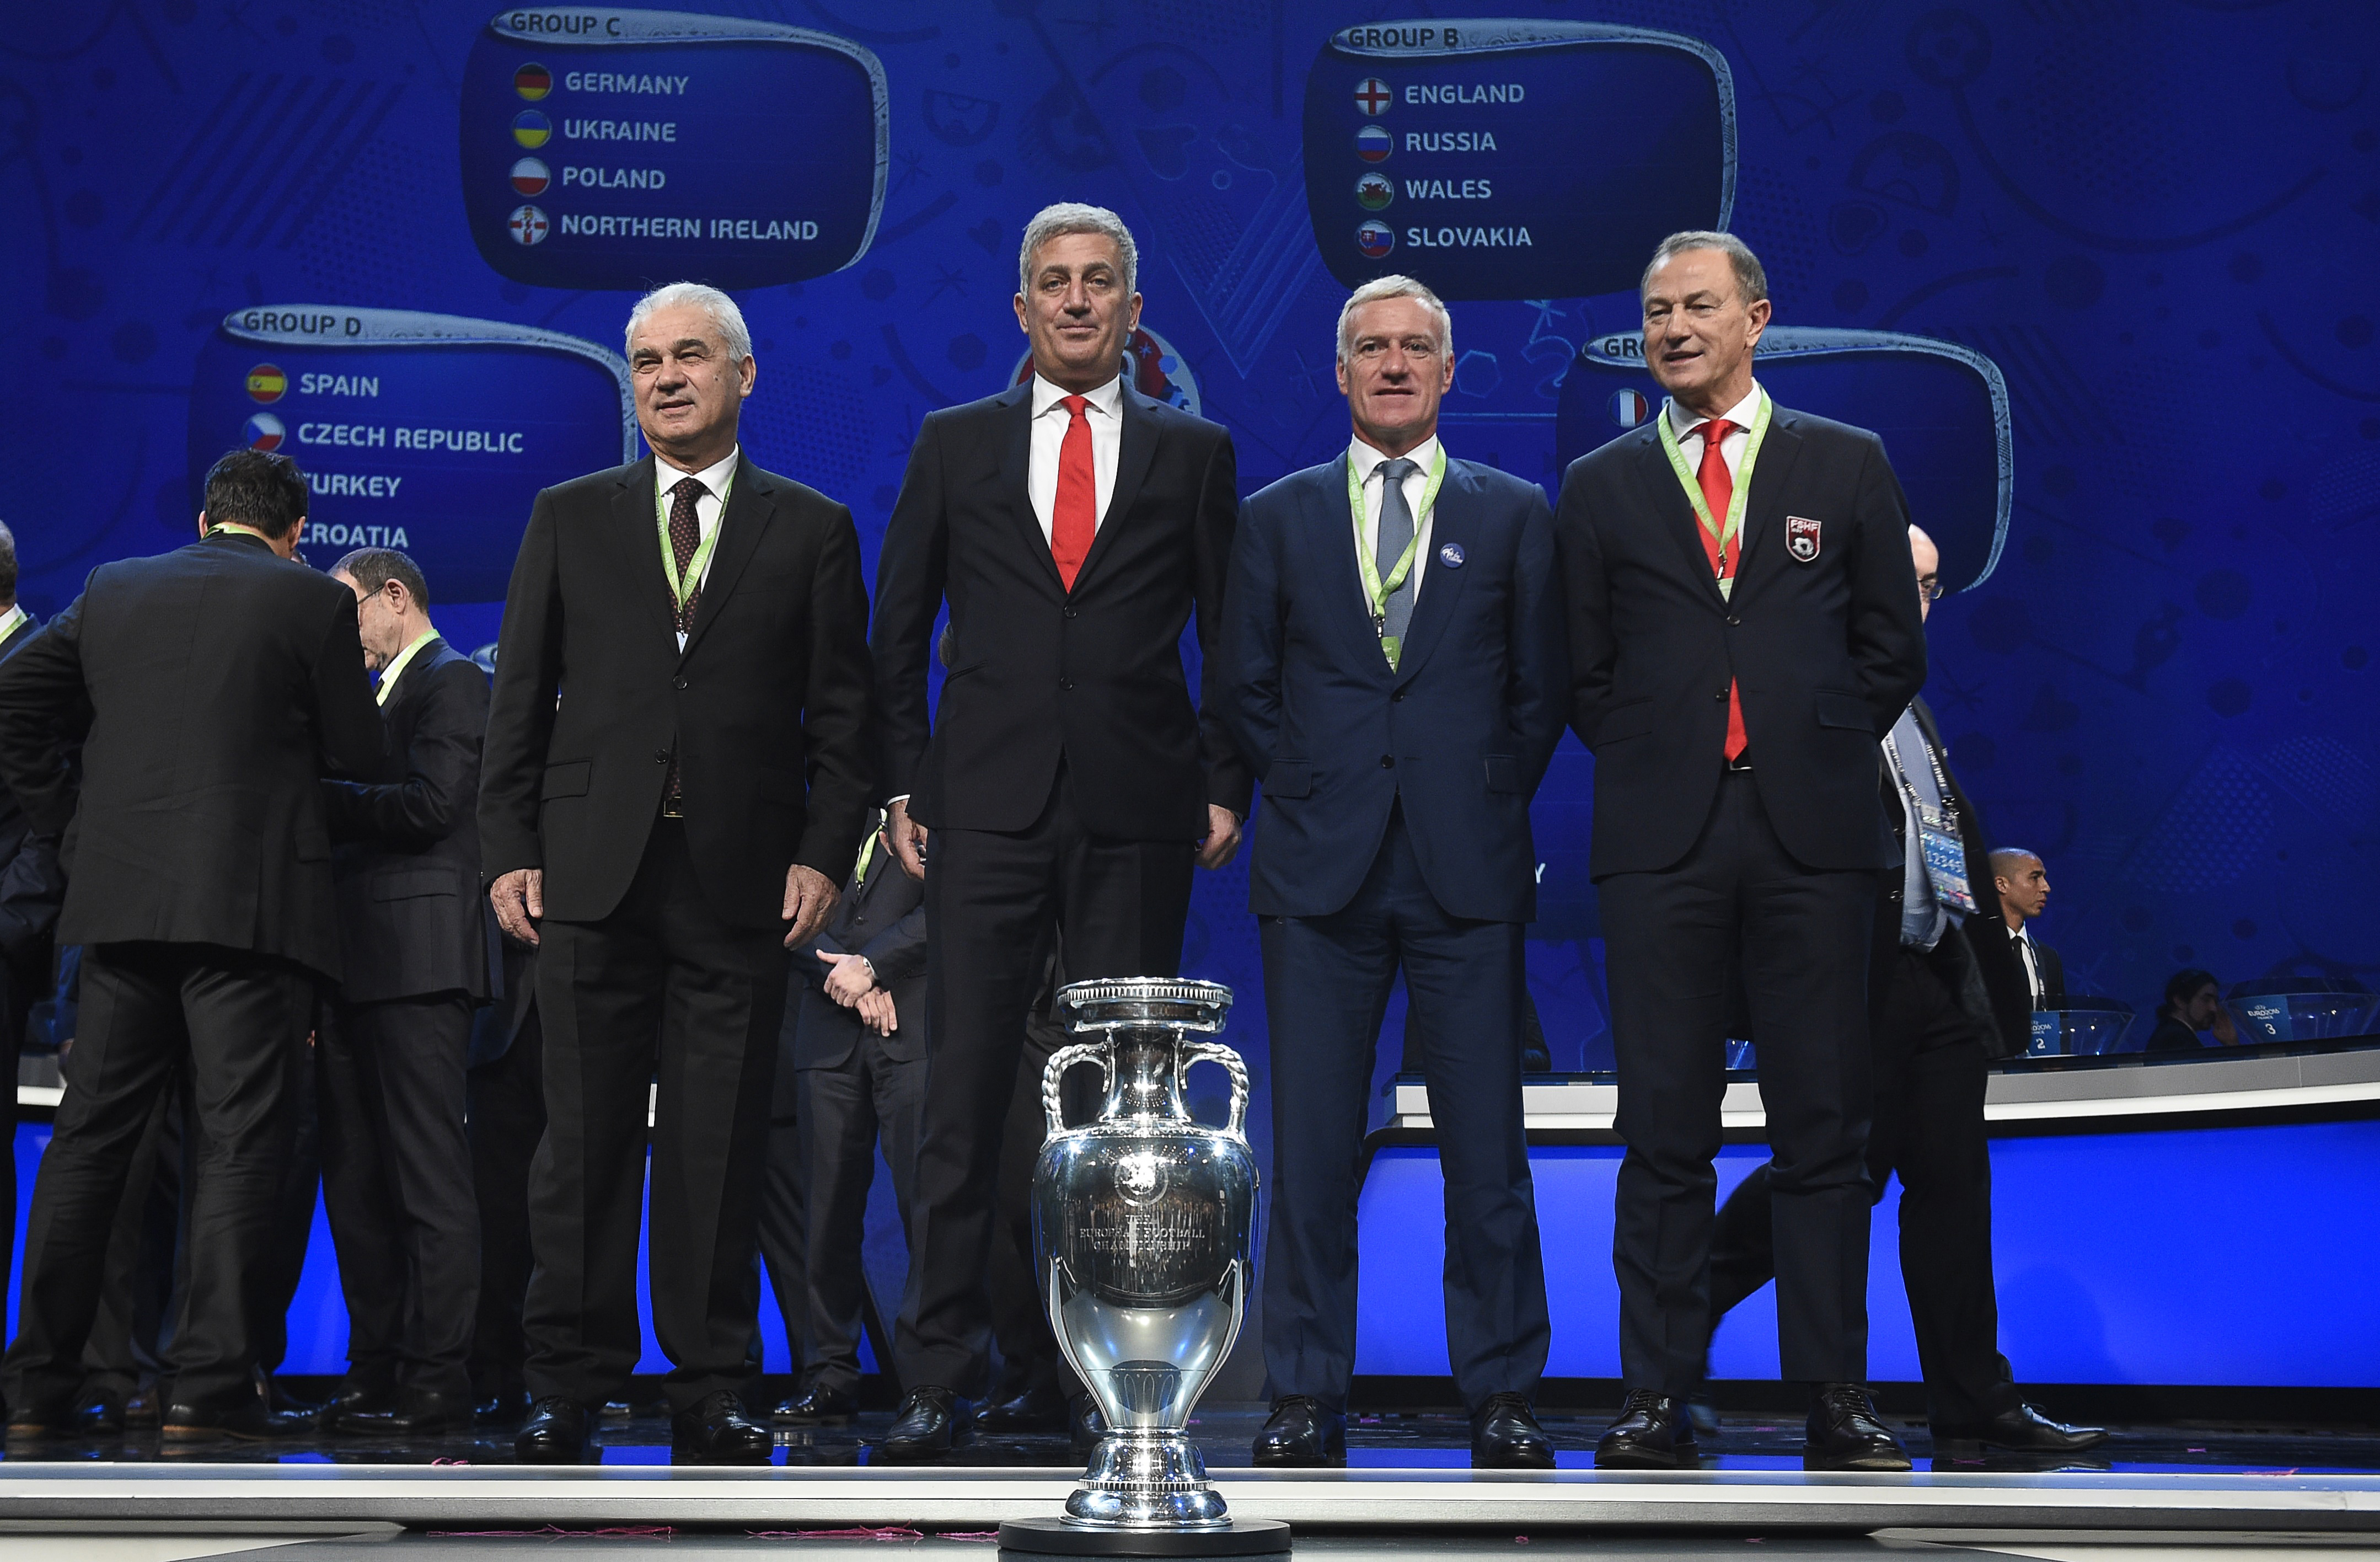 Representatives of teams drawn in group A (L-R) Romania's coach Anghel Iordanescu, Switzerland's coach Vladimir Petkovic, France's coach Didier Deschamps and Albania's Italian coach Gianni de Biasi pose after the final draw of the UEFA Euro 2016 football tournament in Paris on December 12, 2015.  AFP PHOTO / LIONEL BONAVENTURE / AFP / LIONEL BONAVENTURE        (Photo credit should read LIONEL BONAVENTURE/AFP/Getty Images)